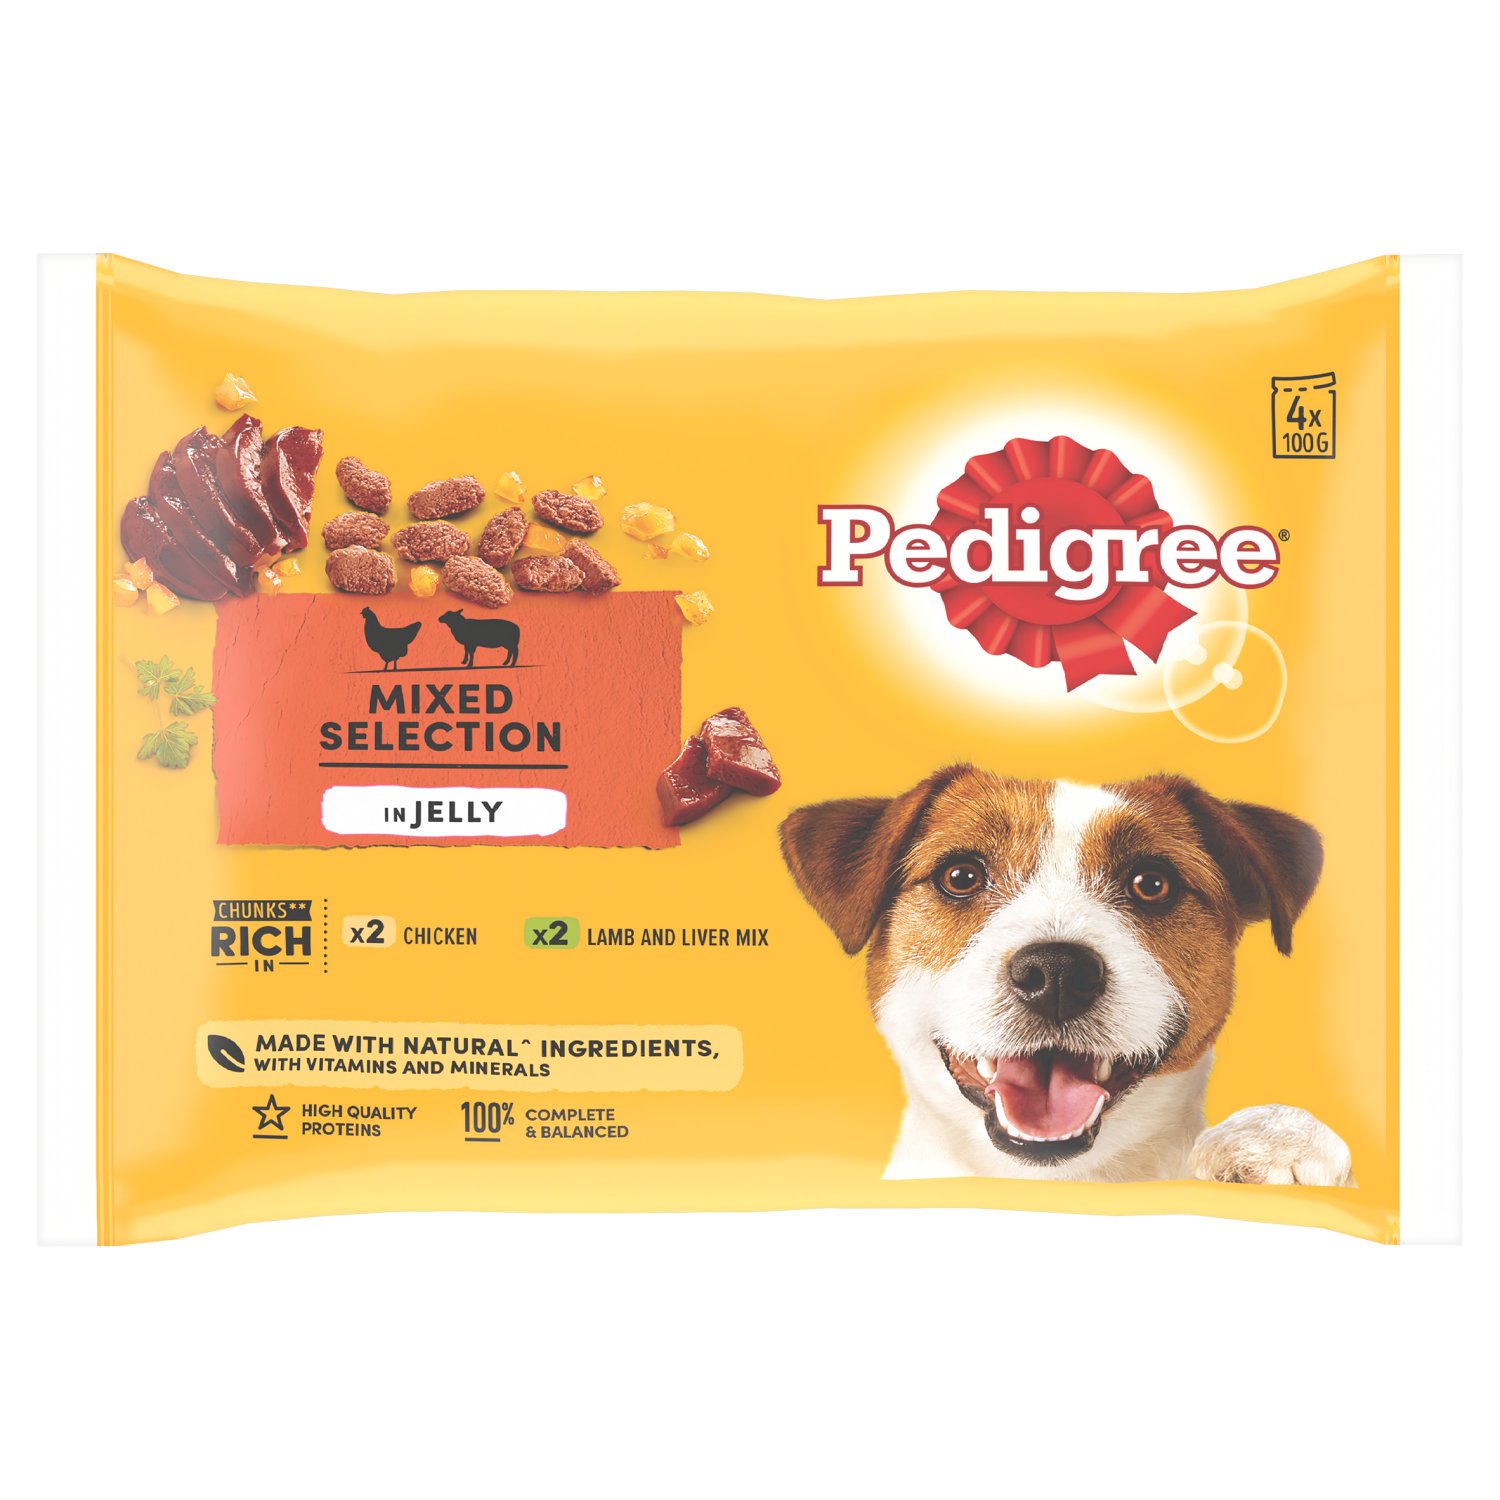 Pedigree Chicken & Lamb Mixed Selection Dog Food Pouch 4 Pack (100 g)